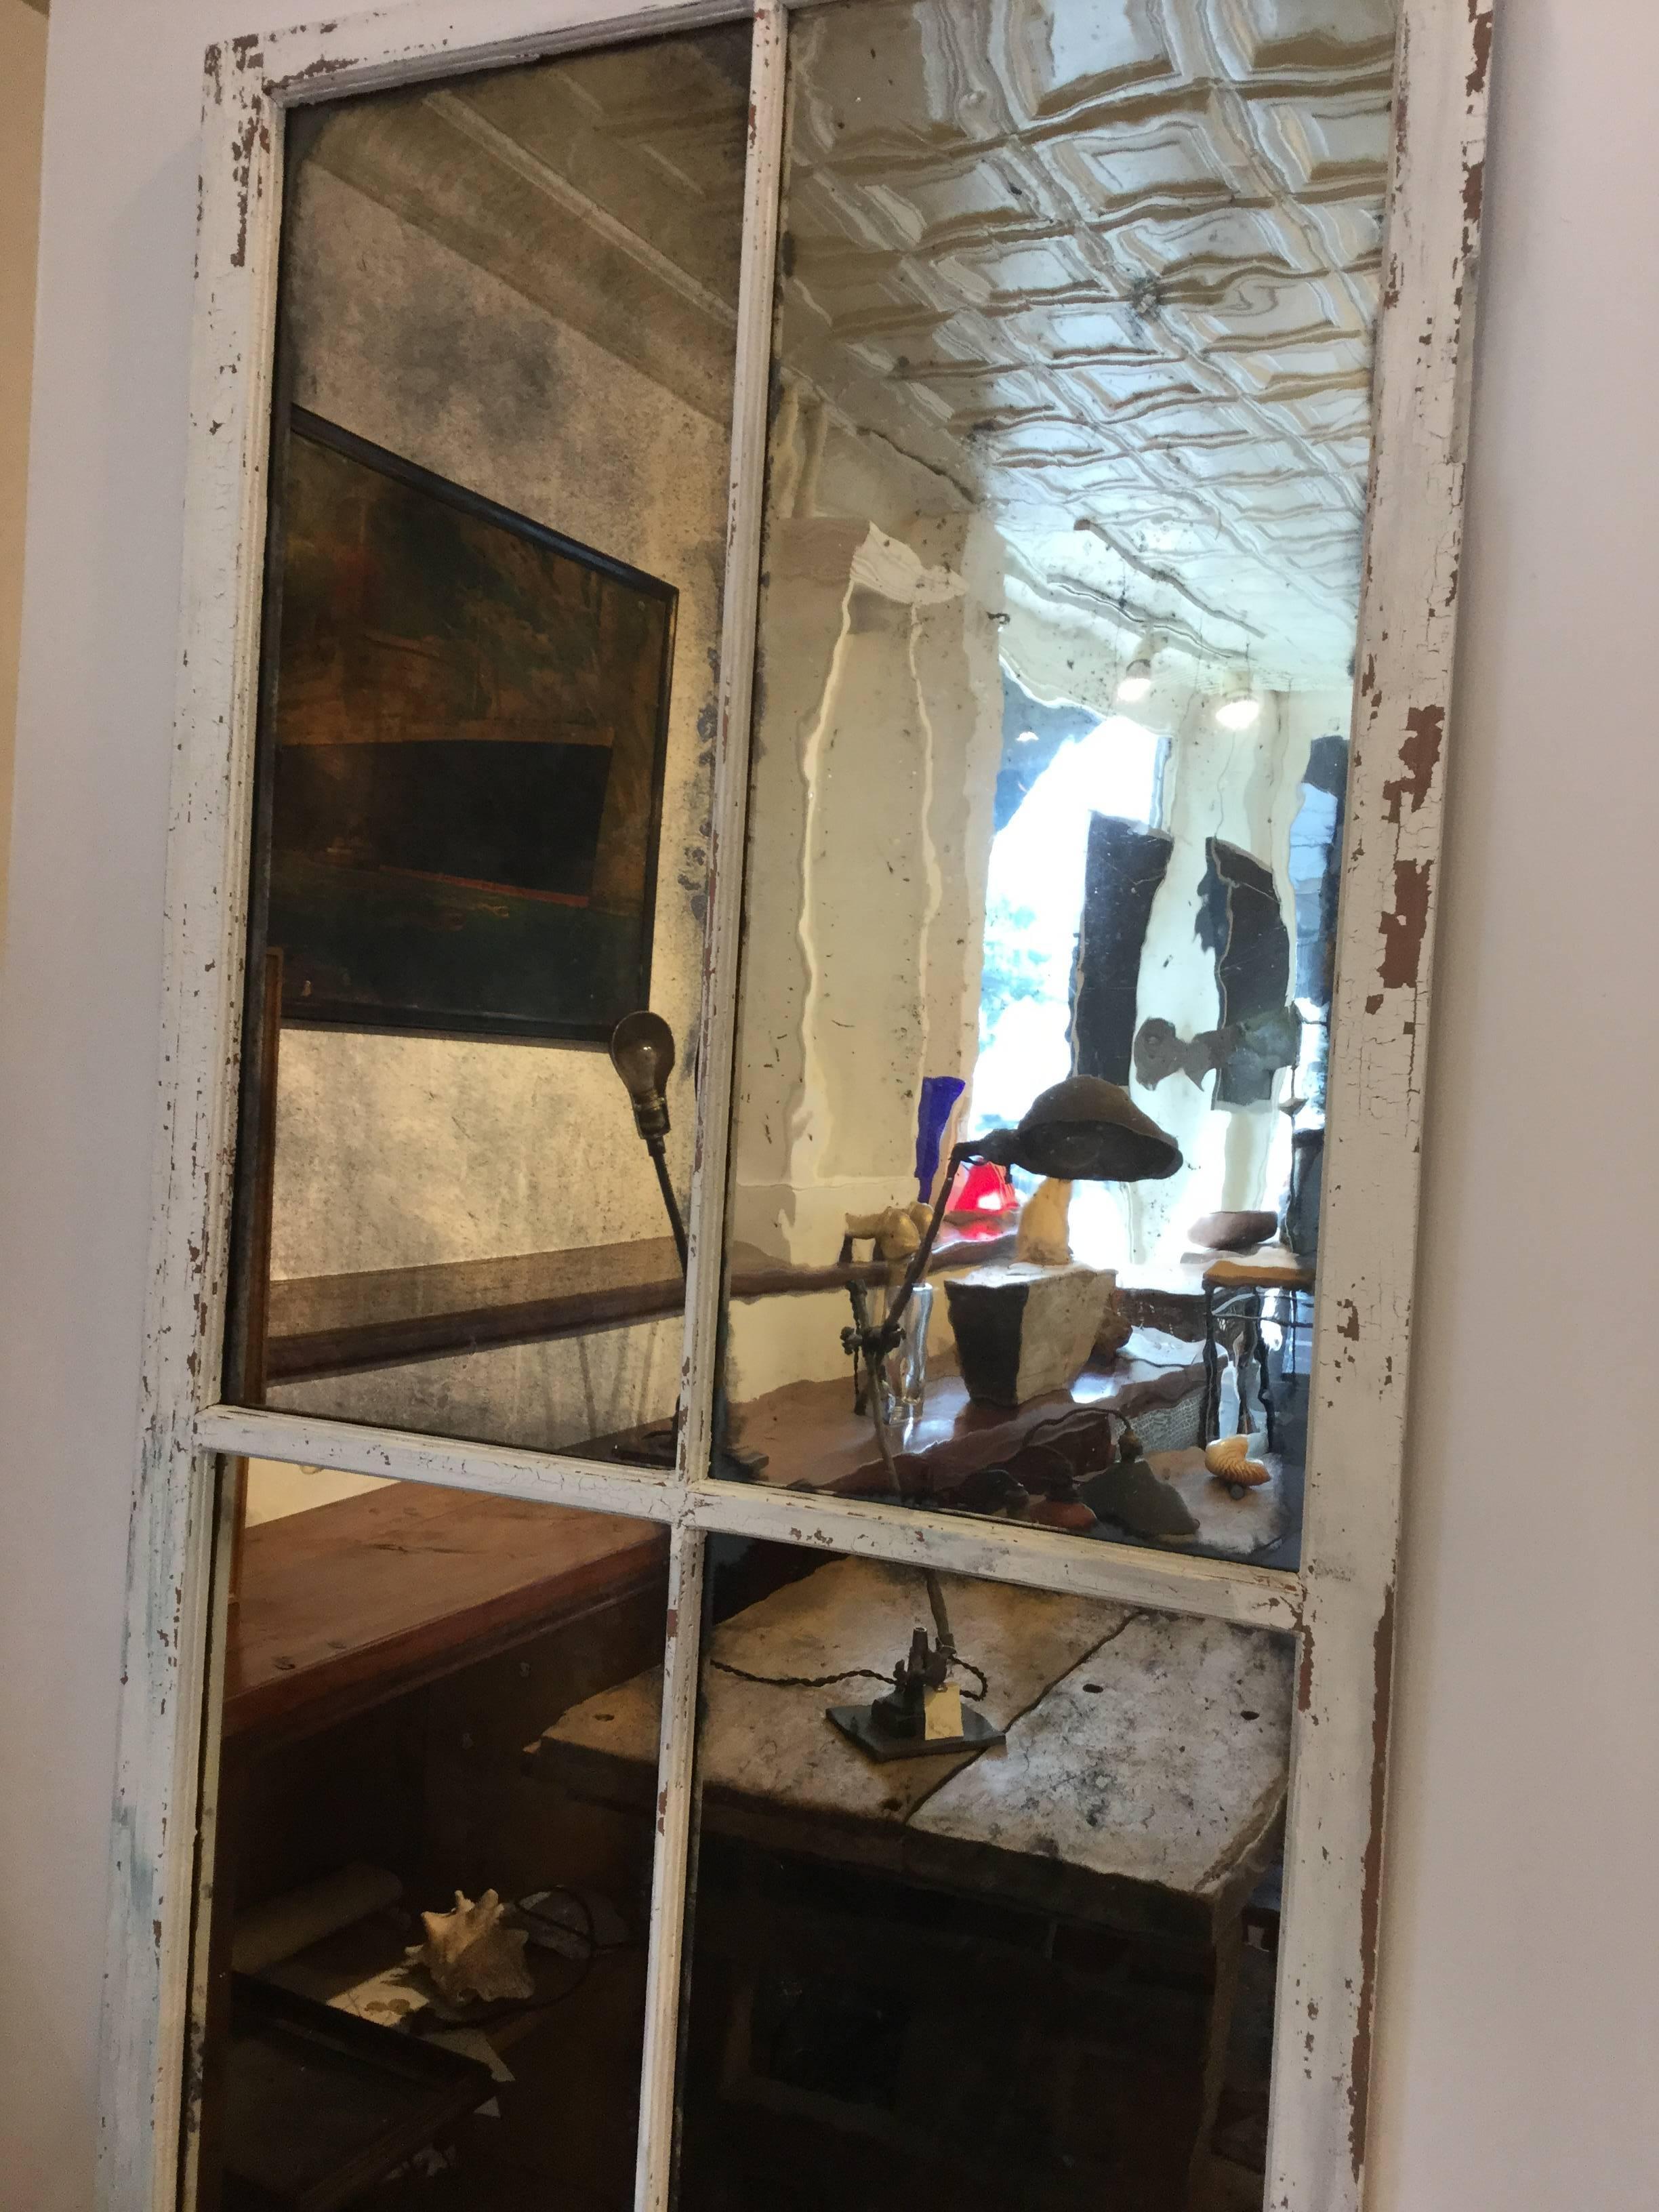 Old four-pane window with original wavy glass that silver has been applied to make an interesting architectural mirror.